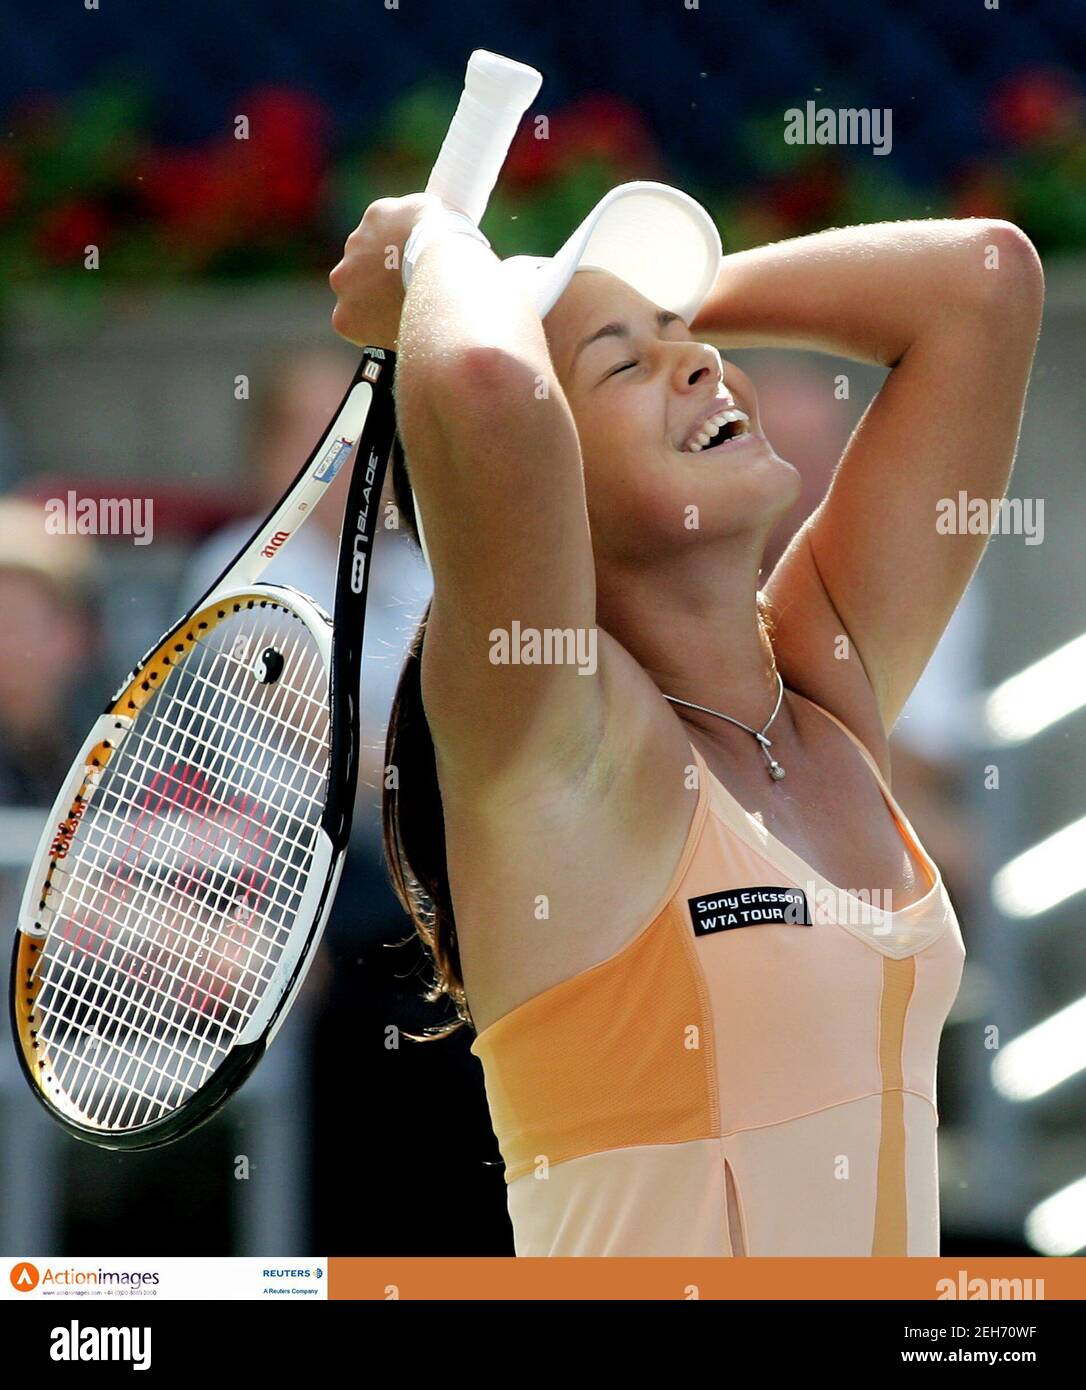 Tennis - Rogers Cup, Sony Ericsson WTA Tour - Montreal, Canada - 21/8/06  Ana Ivanovic of Serbia celebrates her win over Martina Hingis of Switzerland in the finals at the Rogers Cup, Sony Ericsson WTA Tour  Mandatory Credit: Action Images / Chris Wattie  Livepic Stock Photo